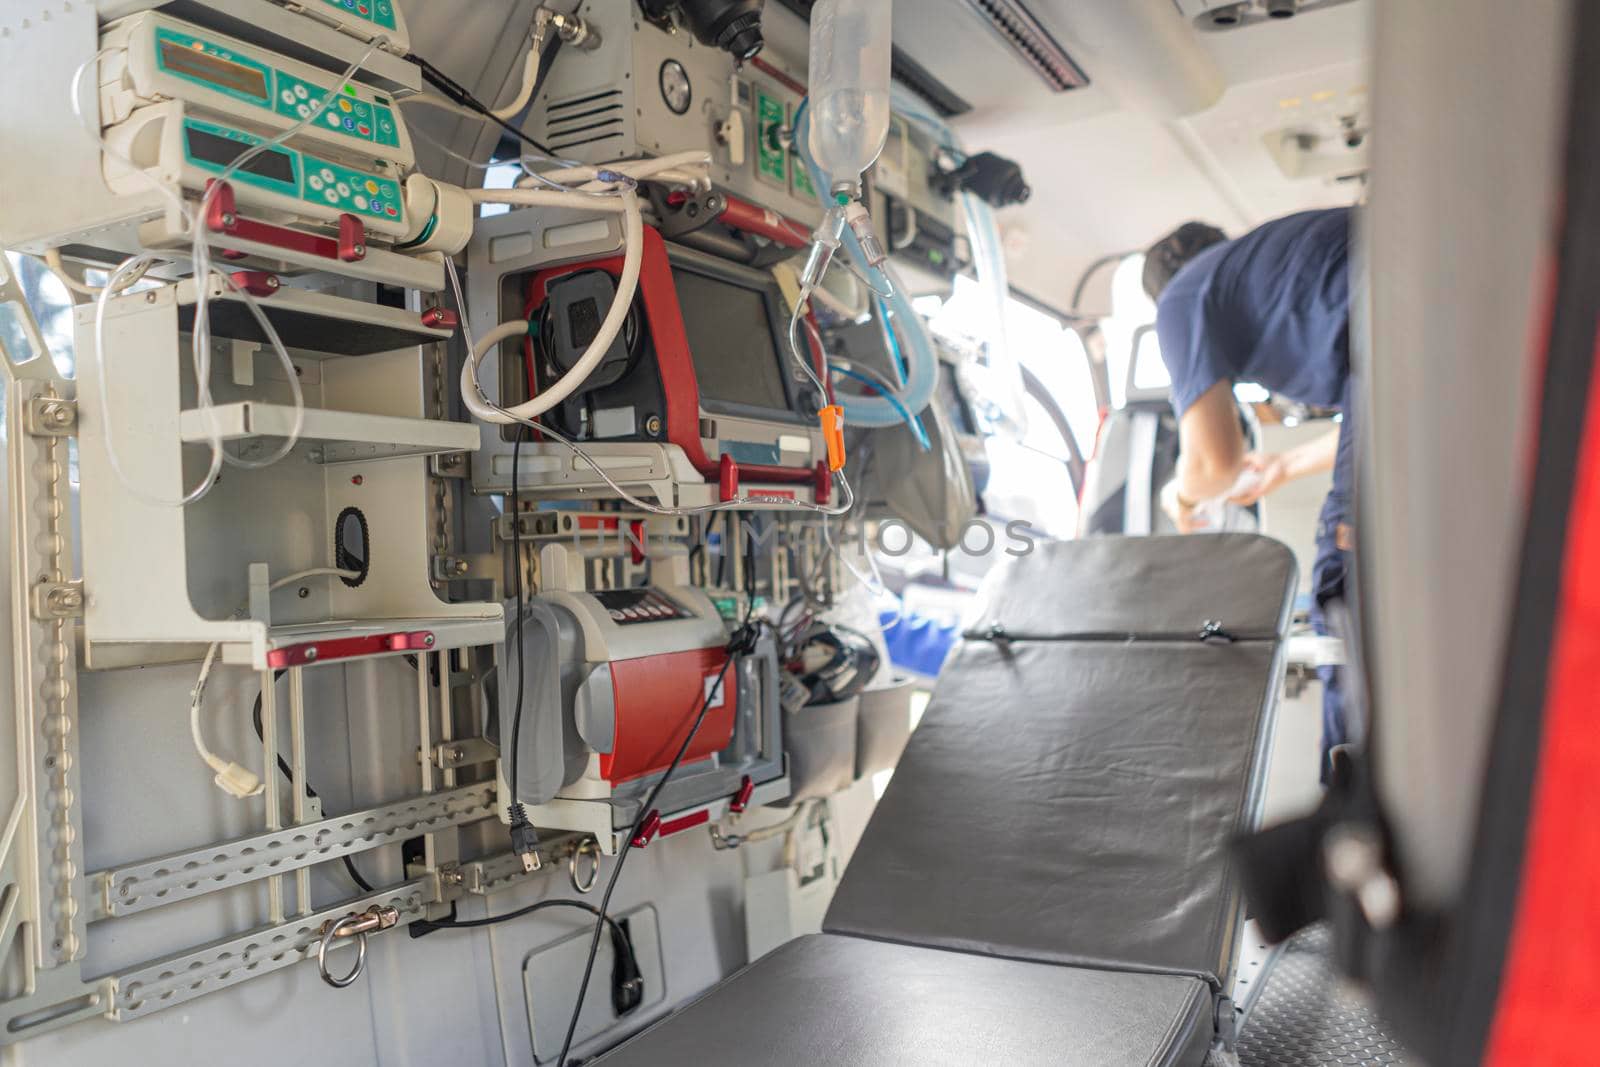 A medical device installed inside a medical helicopter. Used for emergency evacuation by sandyman